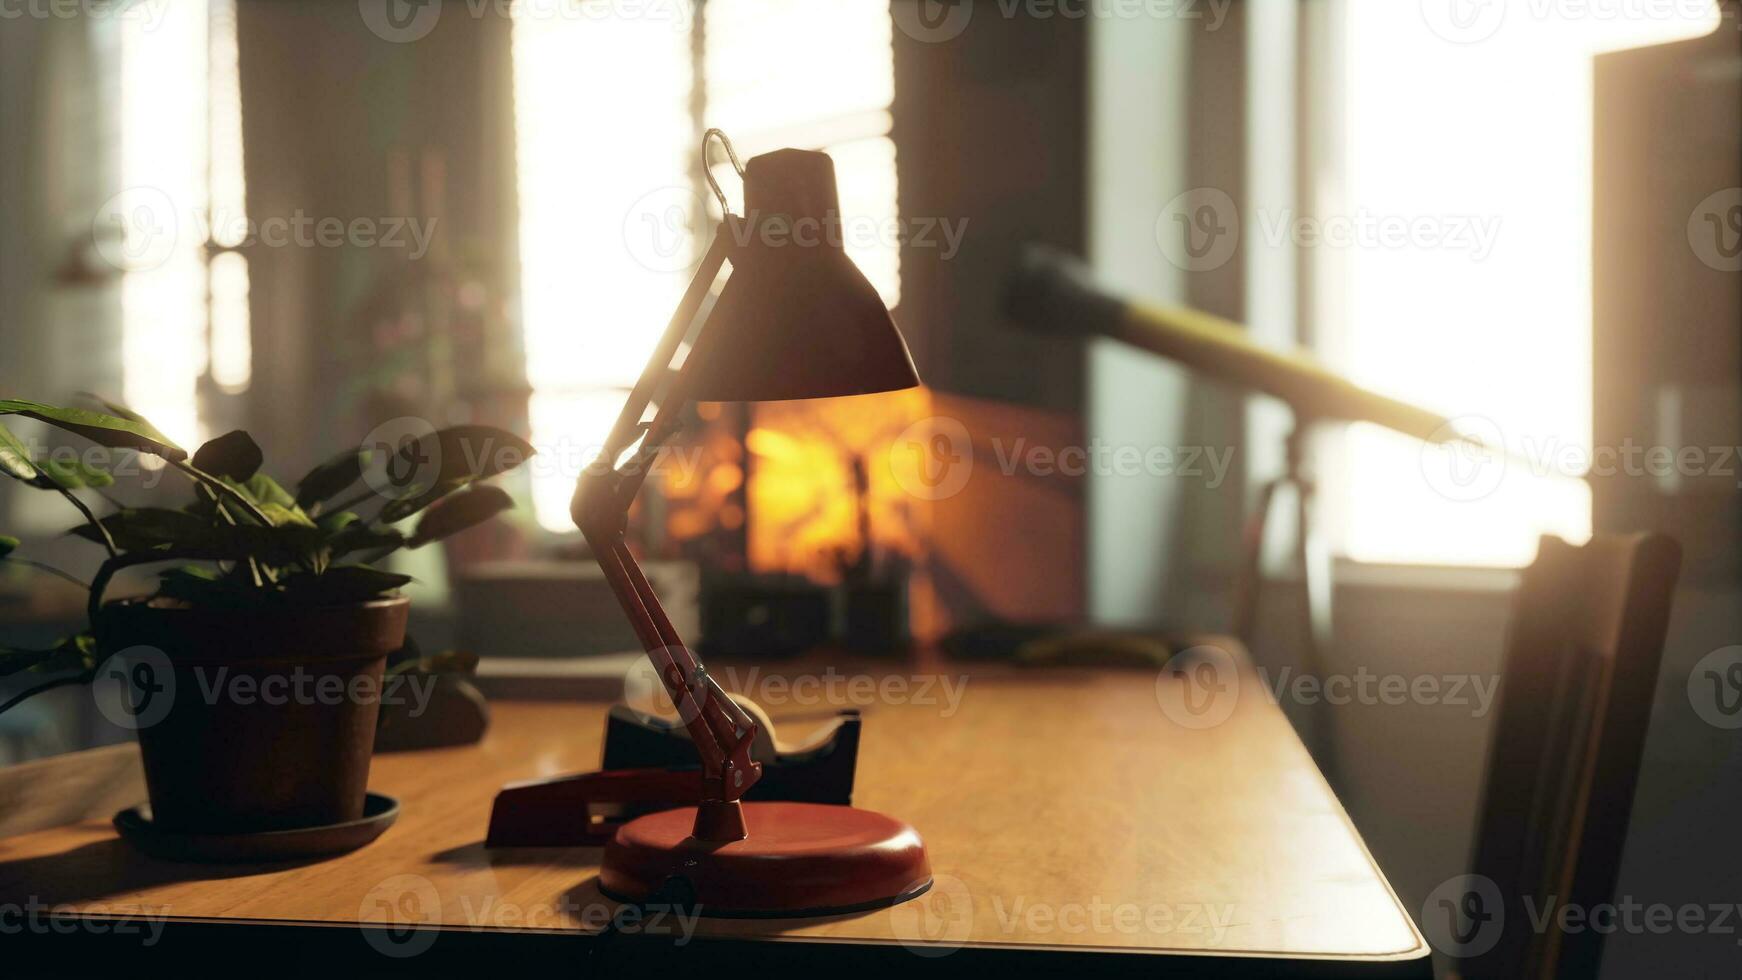 A table with a lamp and a potted plant on it photo